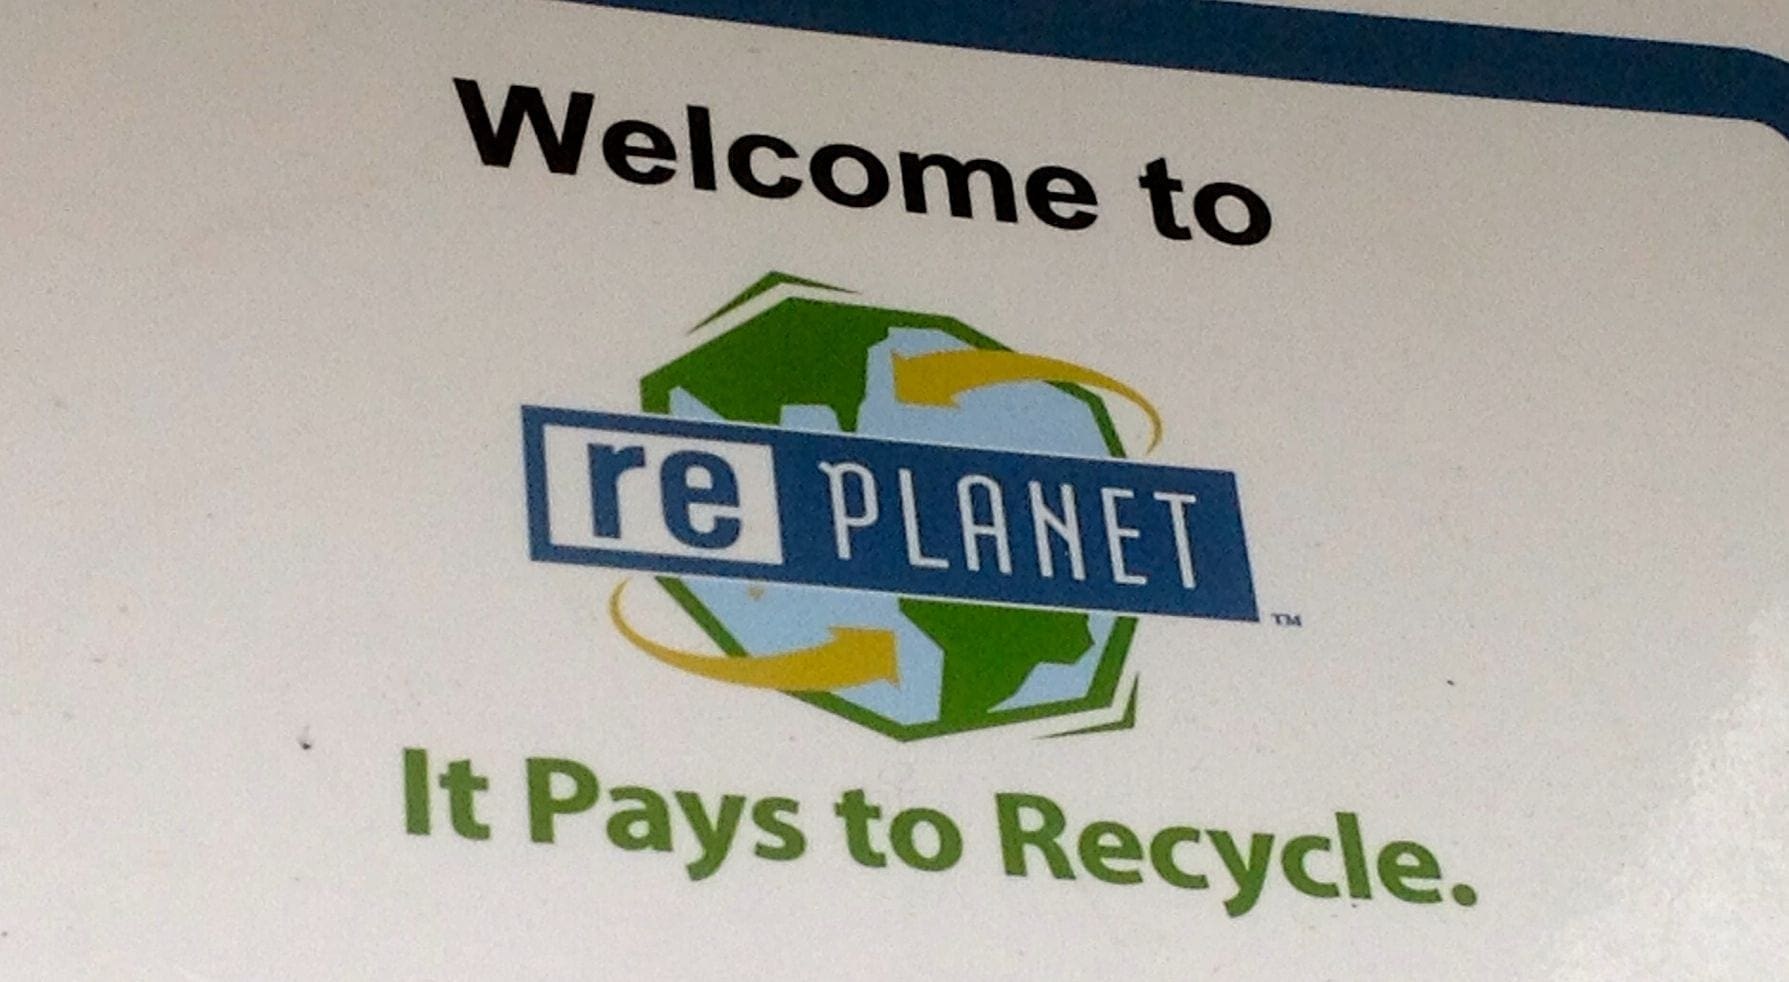 It pays to recycle